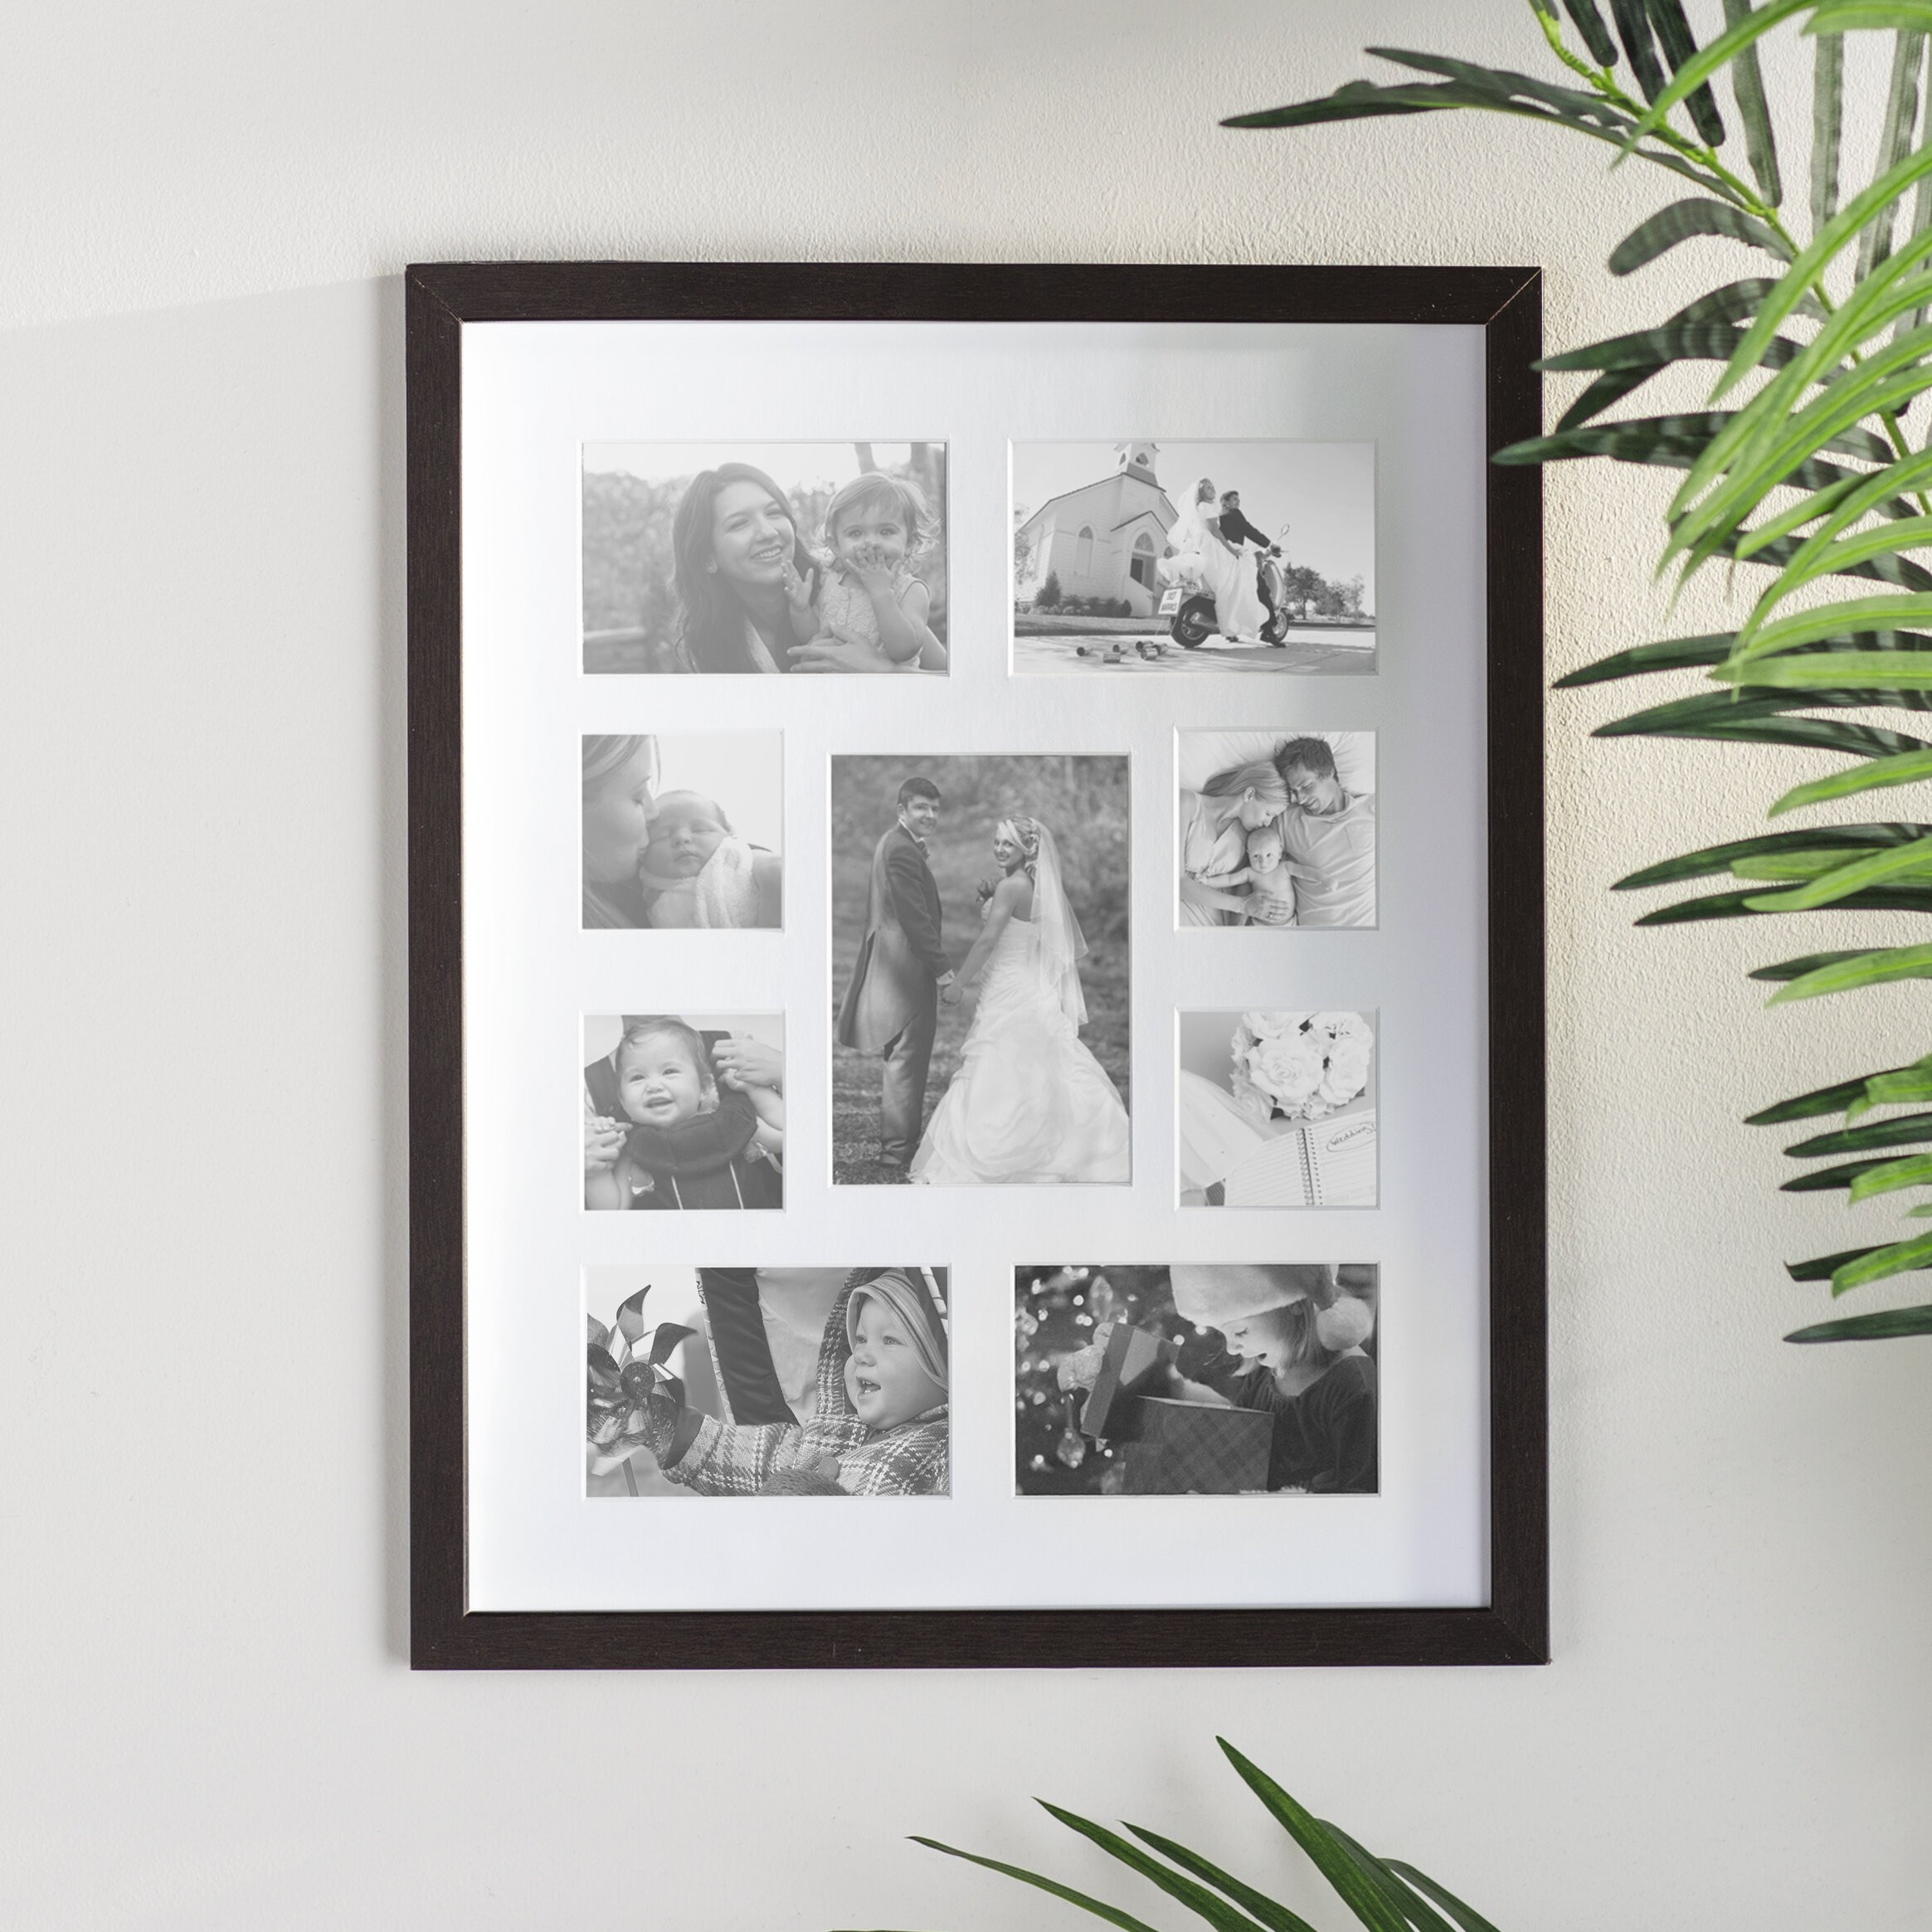 Wayfair Basics 9 Opening Collage Picture Frame